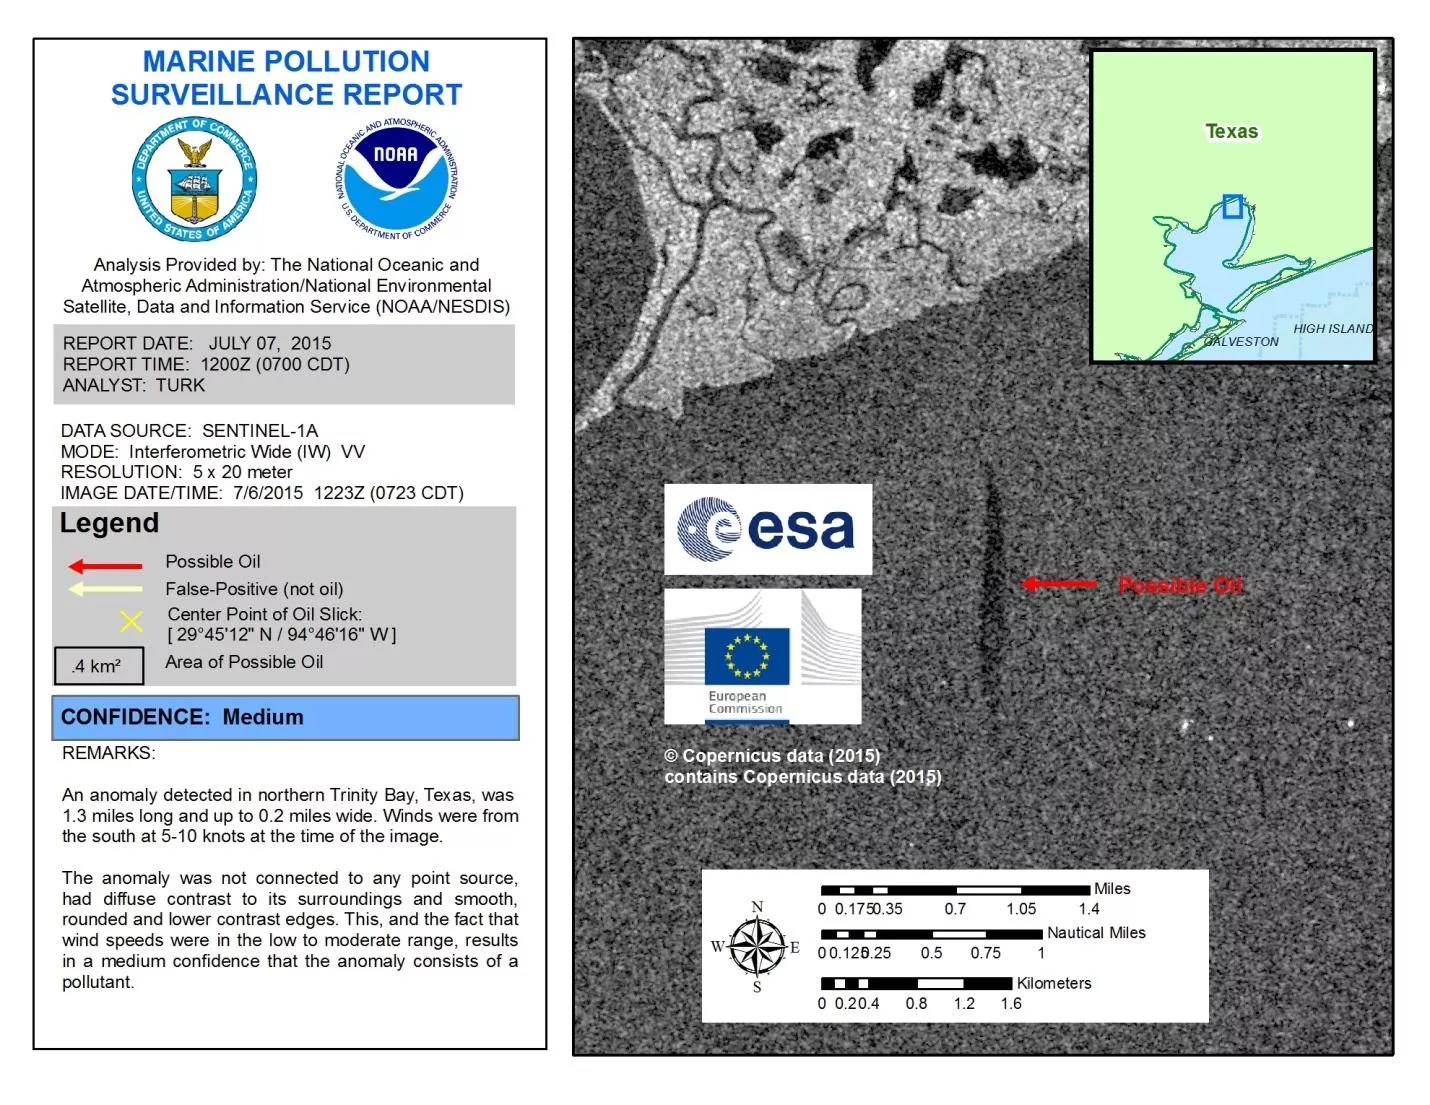 NOAA report showing the satellite image that was used to detect the pipeline leak